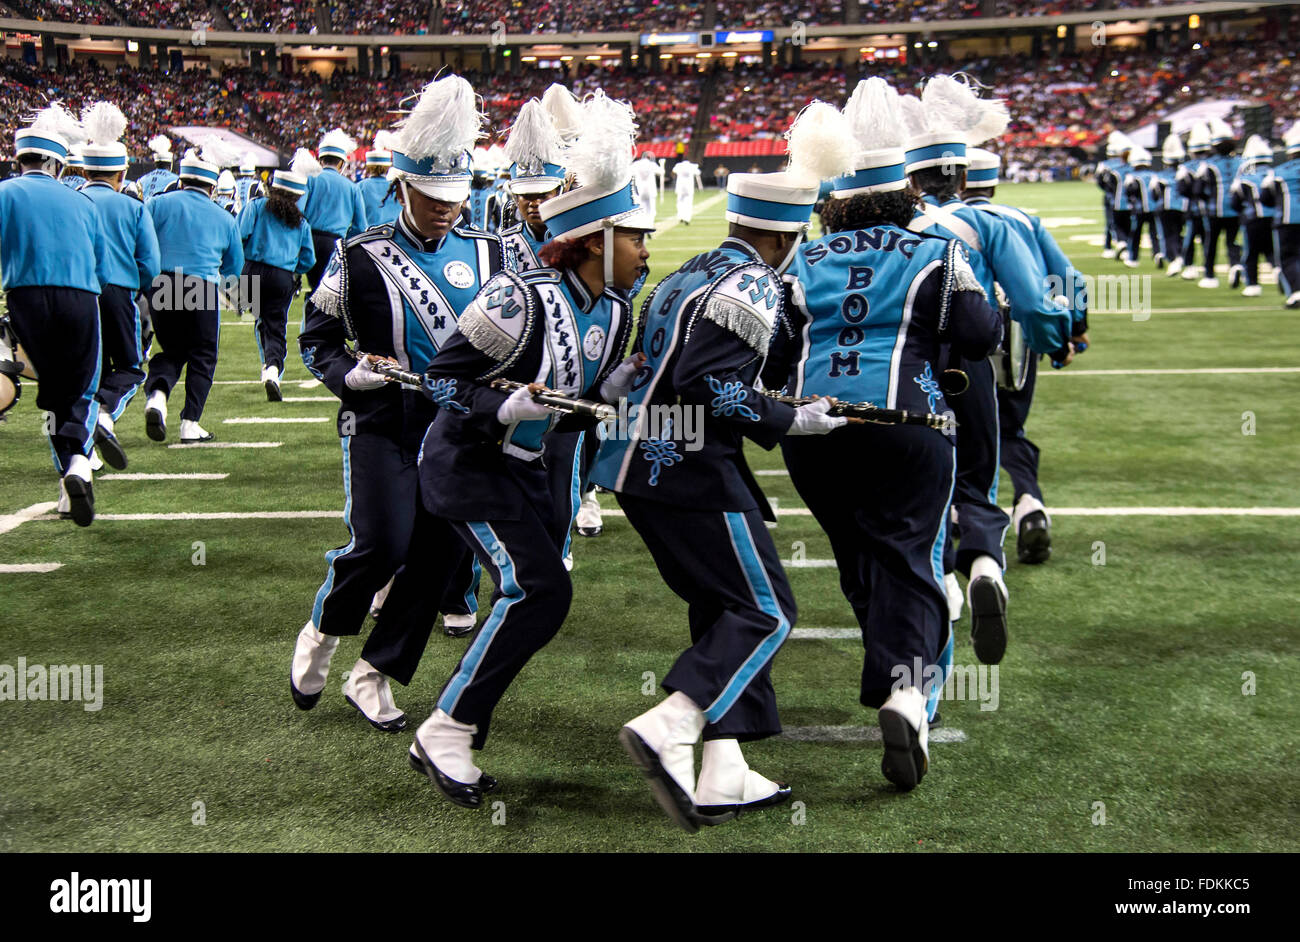 Atlanta, GA, USA. 30th Jan, 2016. The Jackson State Sonic Boom of the South marching band performs at the 2016 Honda Battle of the Bands. The HBOB is an annual invitational showcase of Historically Black College and University marching bands. © Brian Cahn/ZUMA Wire/Alamy Live News Stock Photo